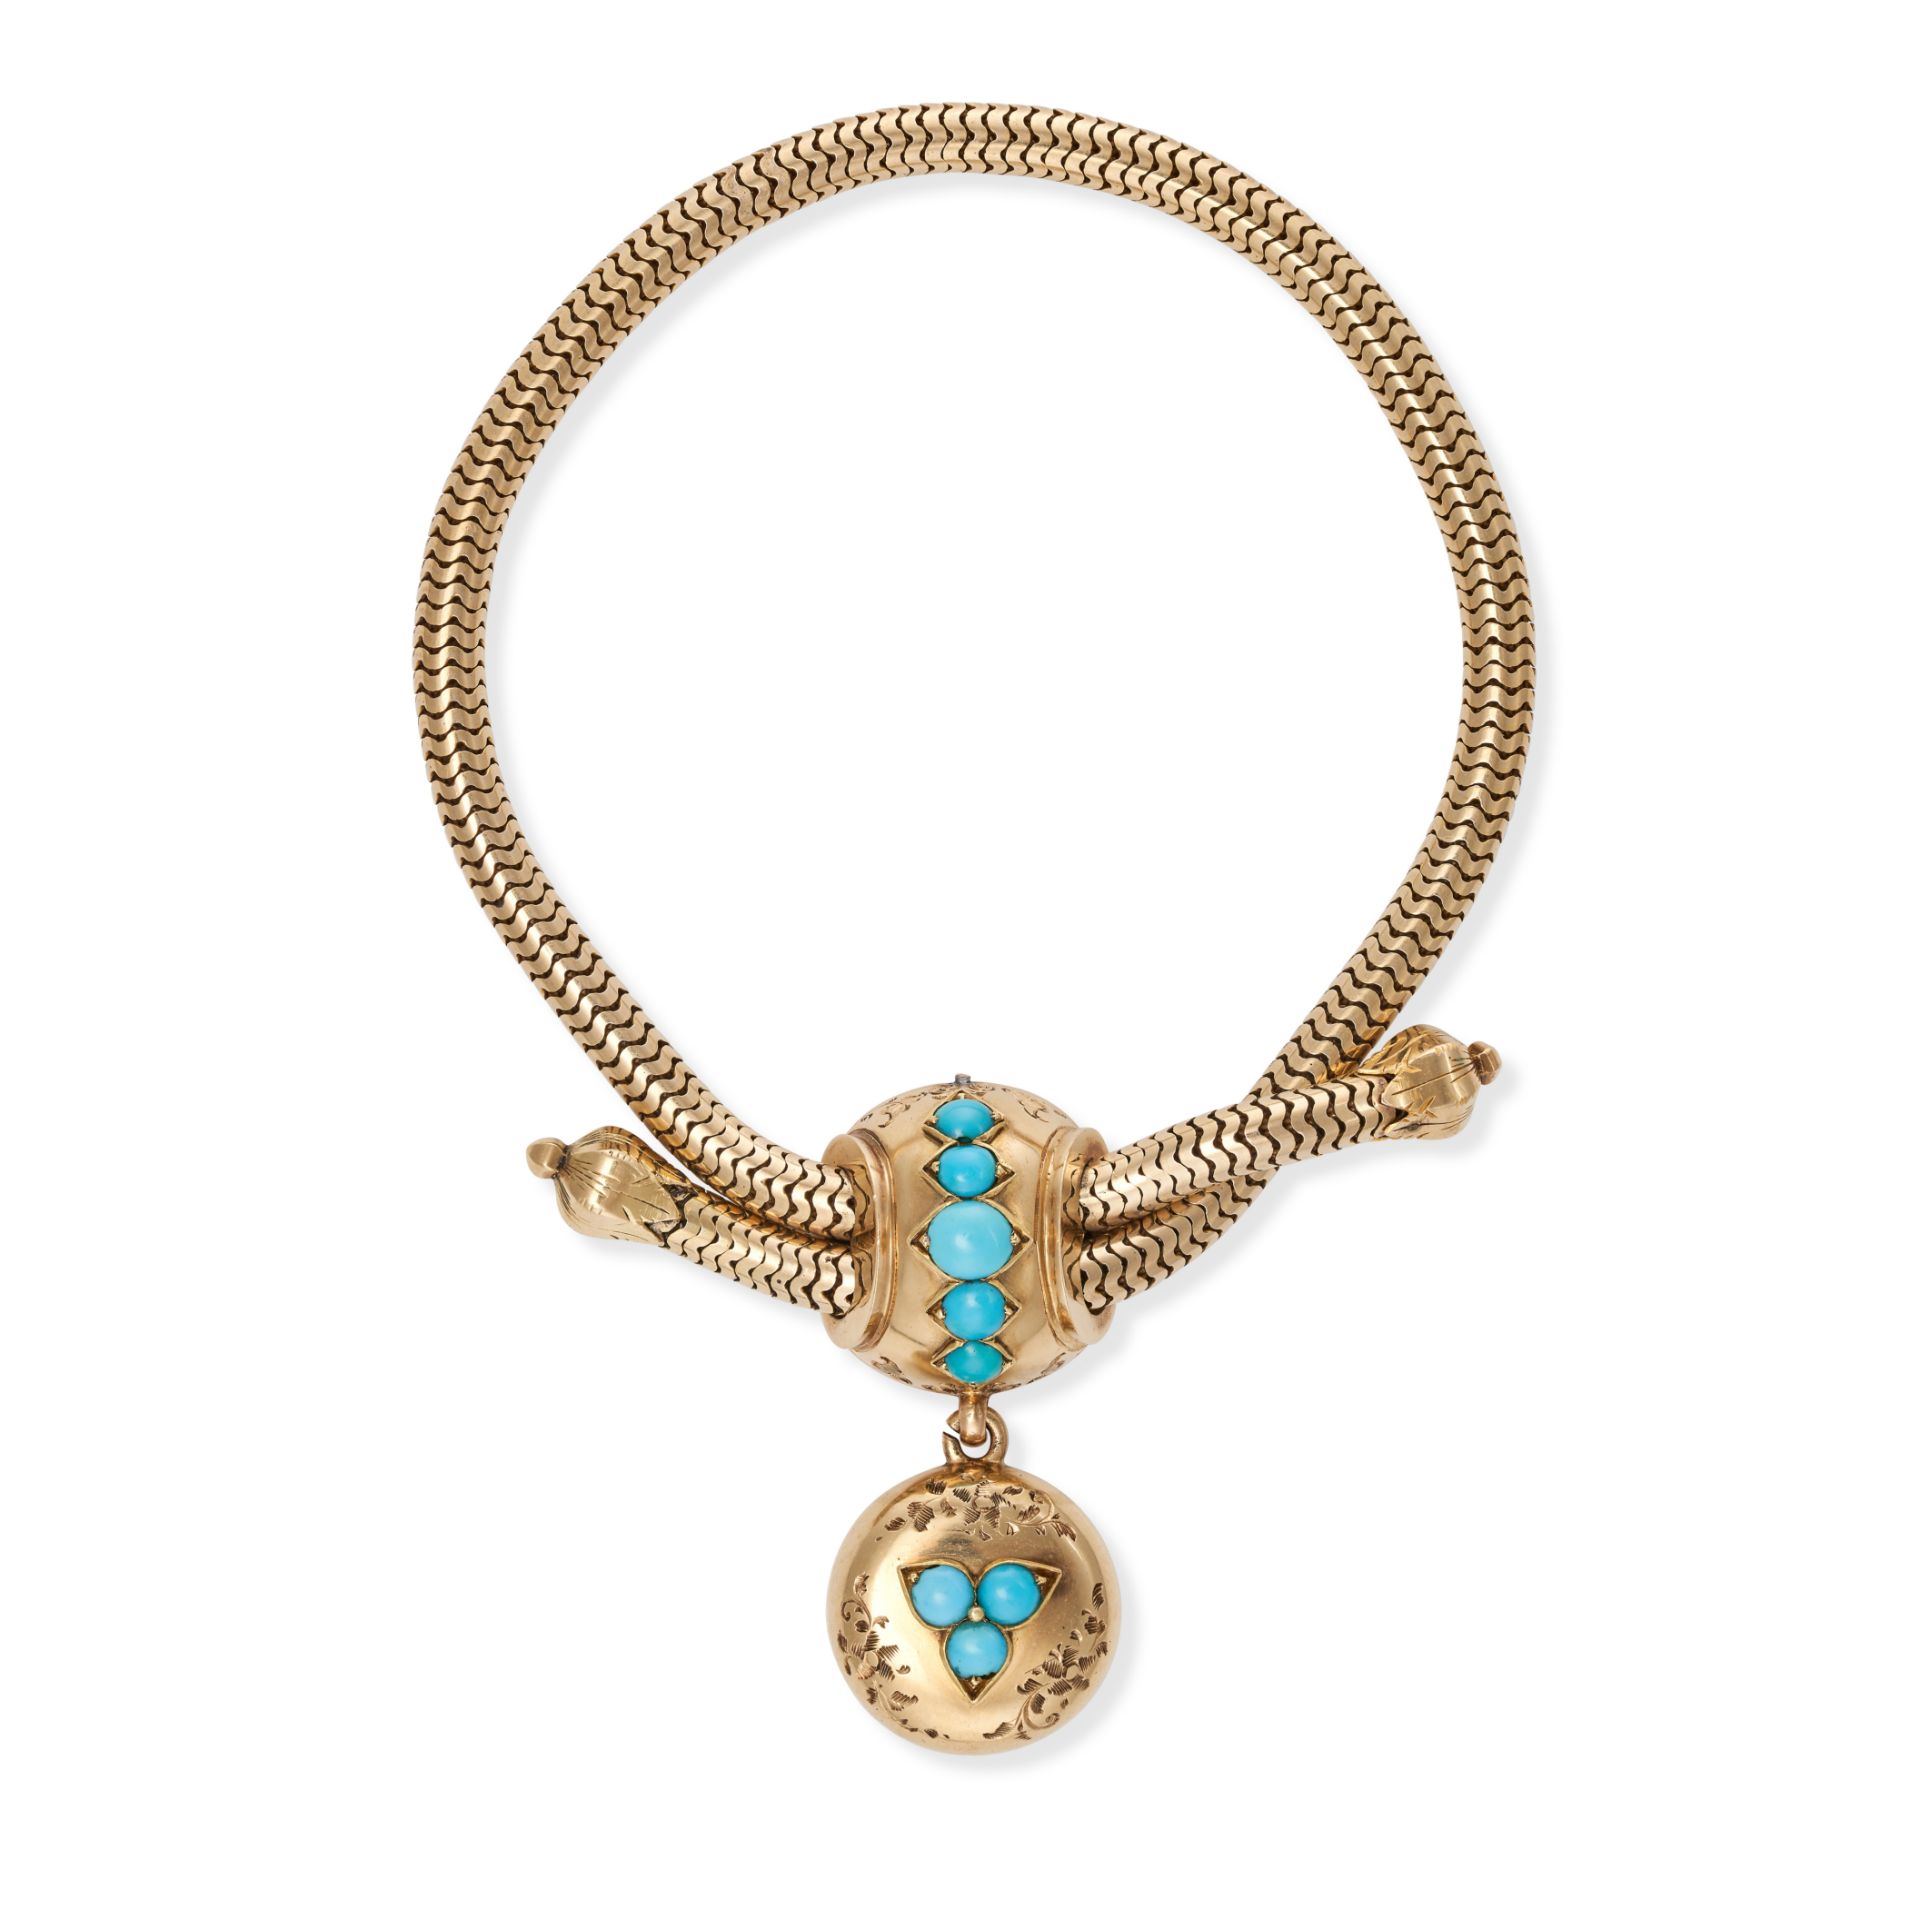 AN ANTIQUE VICTORIAN TURQUOISE BRACELET in yellow gold, comprising a snake link bracelet with a s...